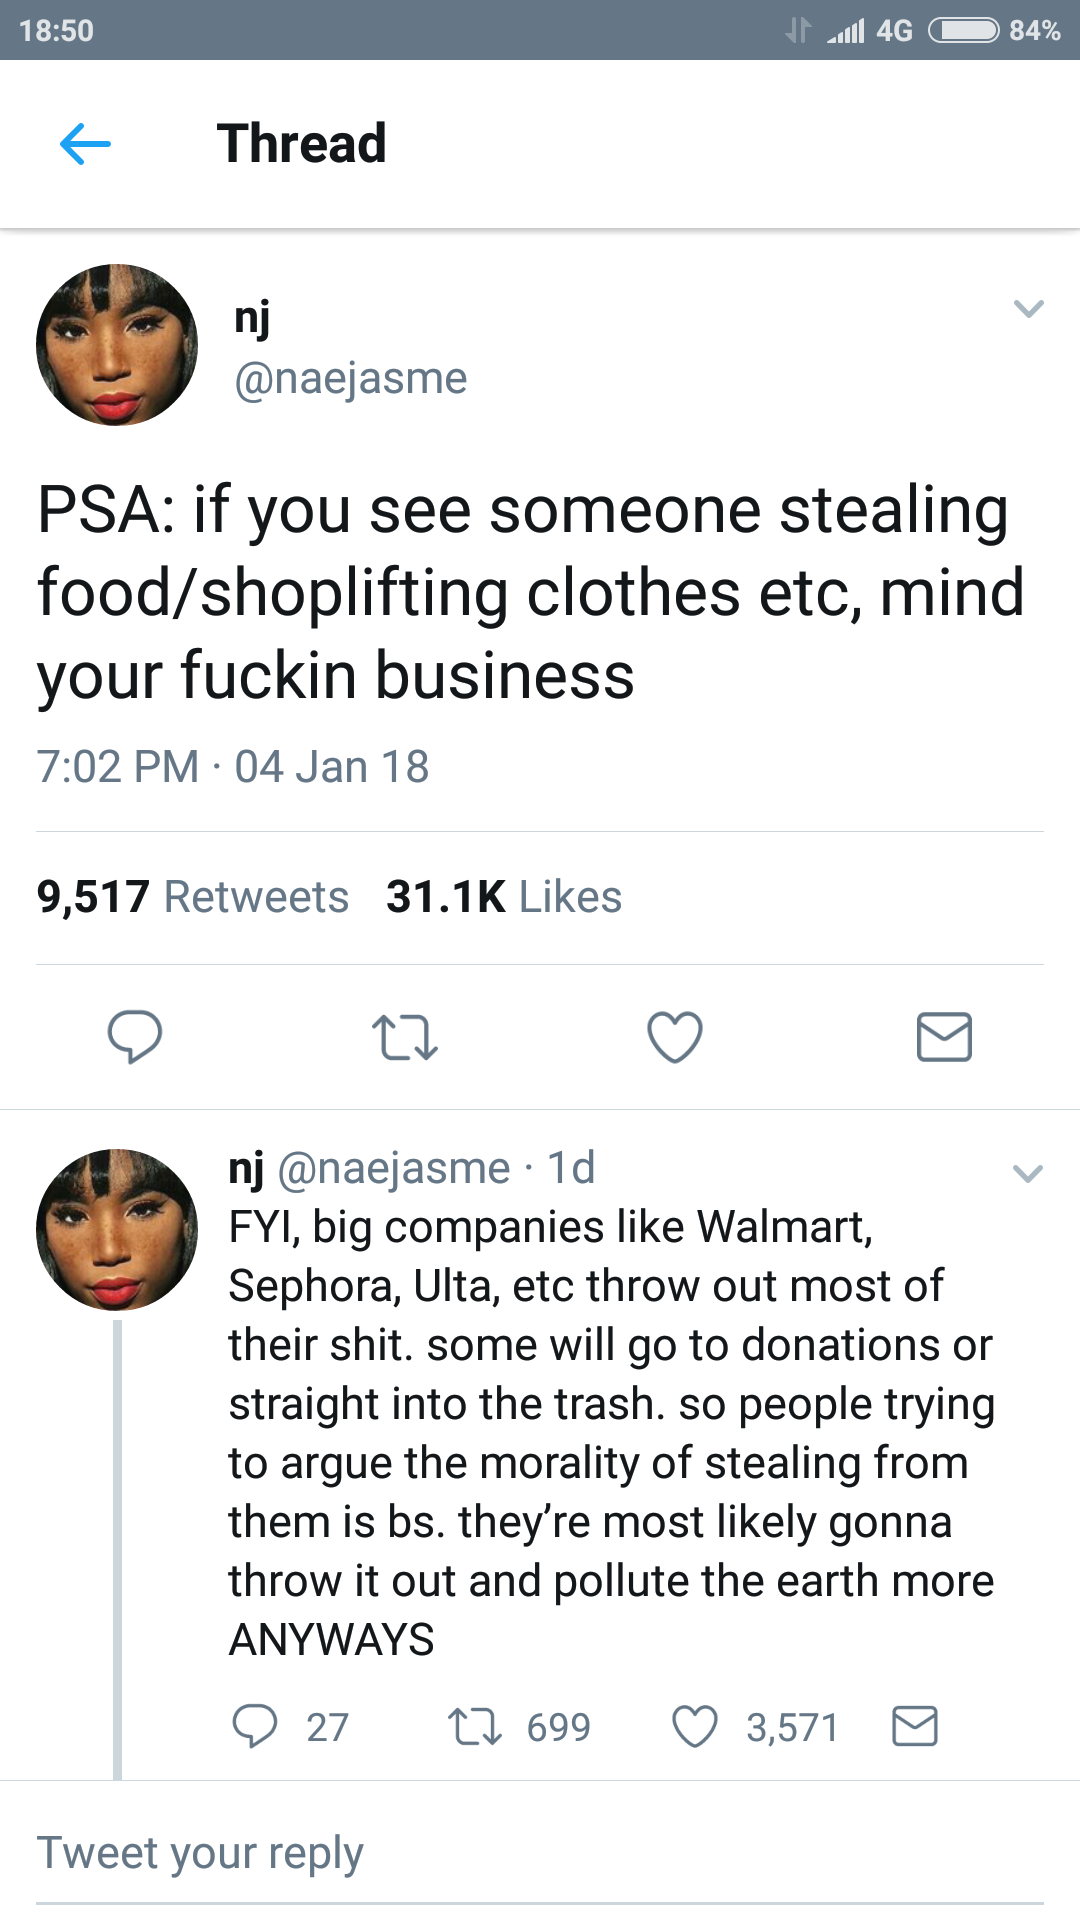 screenshot - Jl will 4G O 84% { Thread Psa if you see someone stealing foodshoplifting clothes etc, mind your fuckin business 04 Jan 18 9,517 Cz nj 1d Fyi, big companies Walmart, Sephora, Ulta, etc throw out most of their shit. some will go to donations o